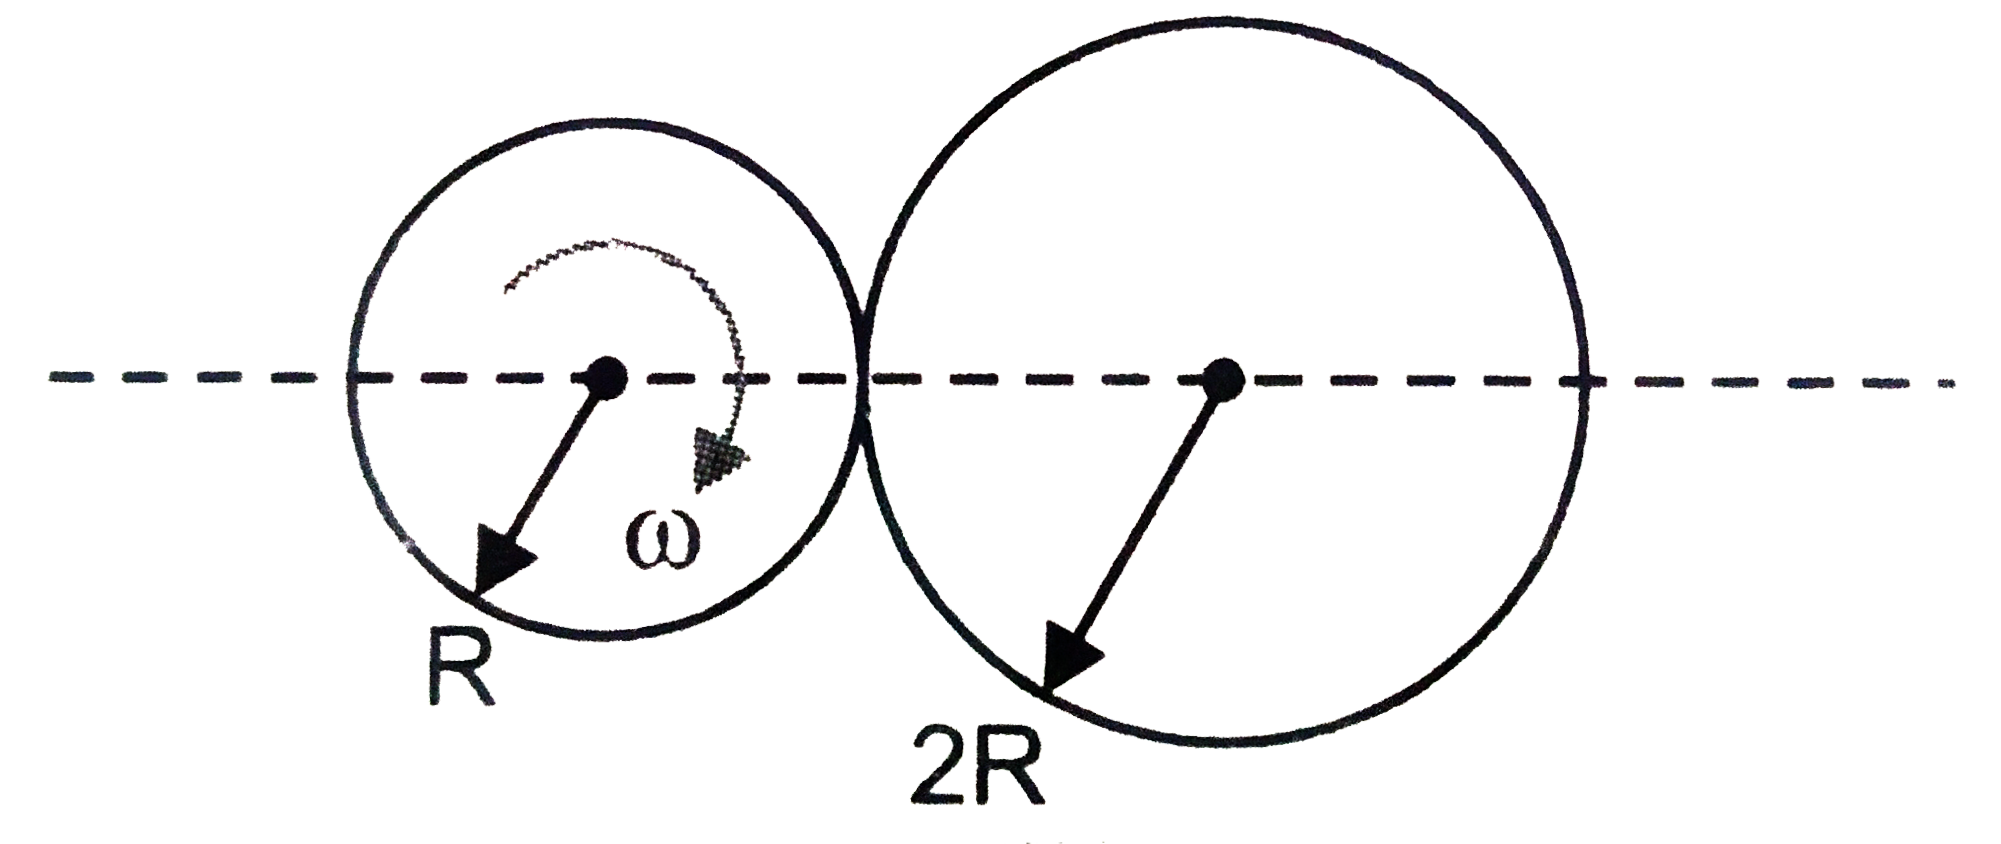 Two discs of radii R and 2R are pressed against each other. Initially, disc with radius R is rotating with angular velocity omega and other disc is stationary. Both discs are hinged at their respective centres and are free to rotate about them. Moment of inertia of smaller disc is I and of bigger disc is 2I about their respective axis of rotation. Find the angular velocity of bigger disc after long time.